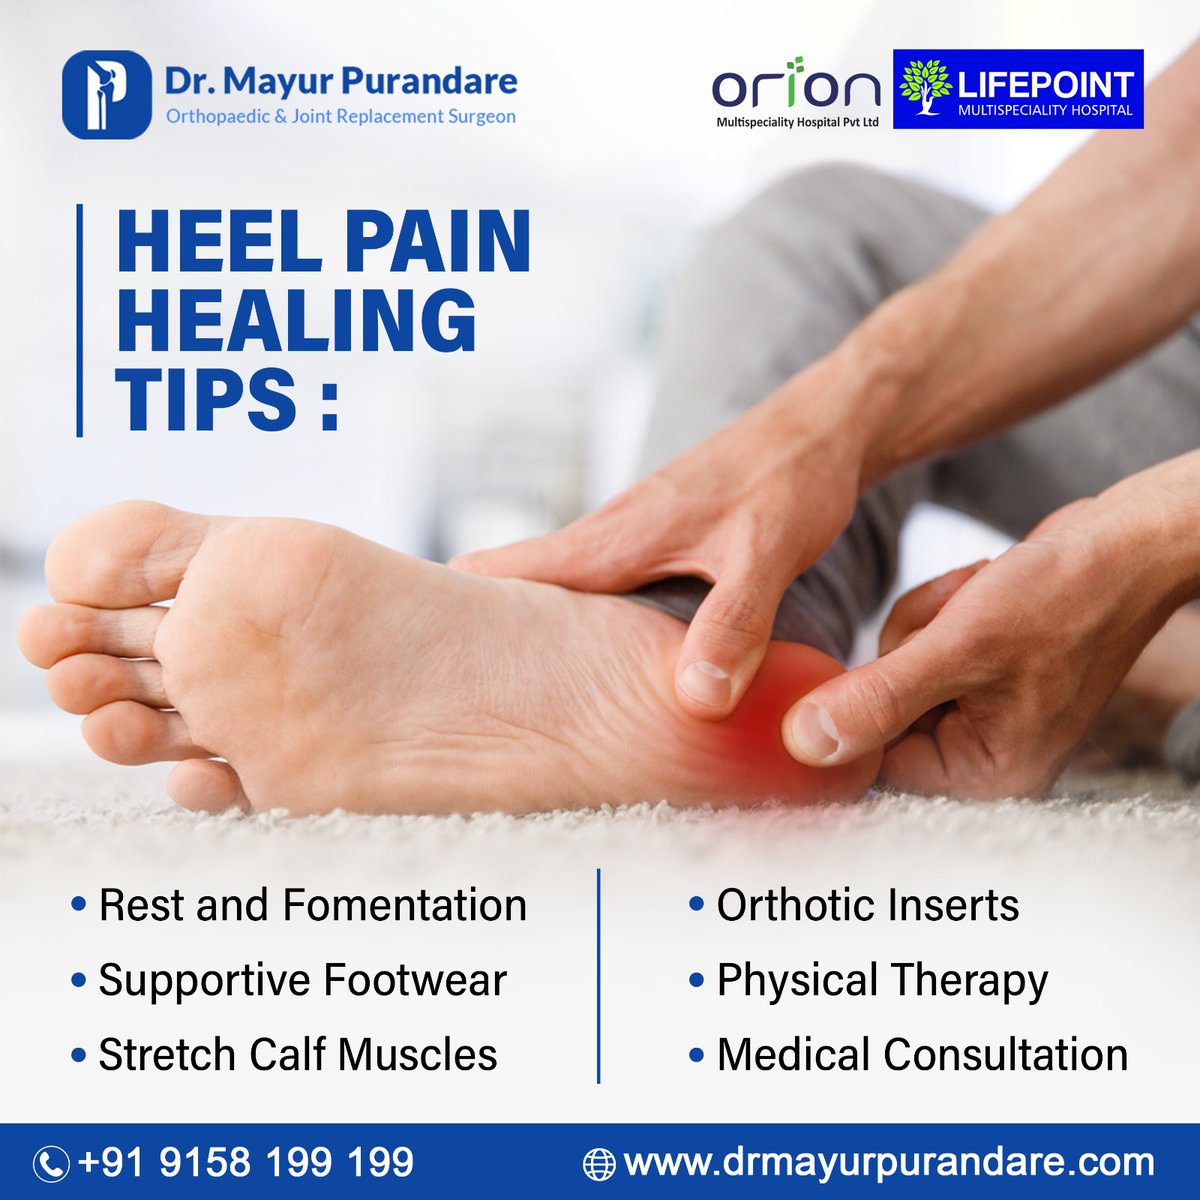 While heel pain can be challenging to manage, implementing these strategies can significantly improve your comfort and promote healing.
.
🌐 Website: drmayurpurandare.com

#orthopedicsolutins #drmayur #pune #ravet #heelpain #heelpainhealing #heelpaintreatment #heelpainrelief